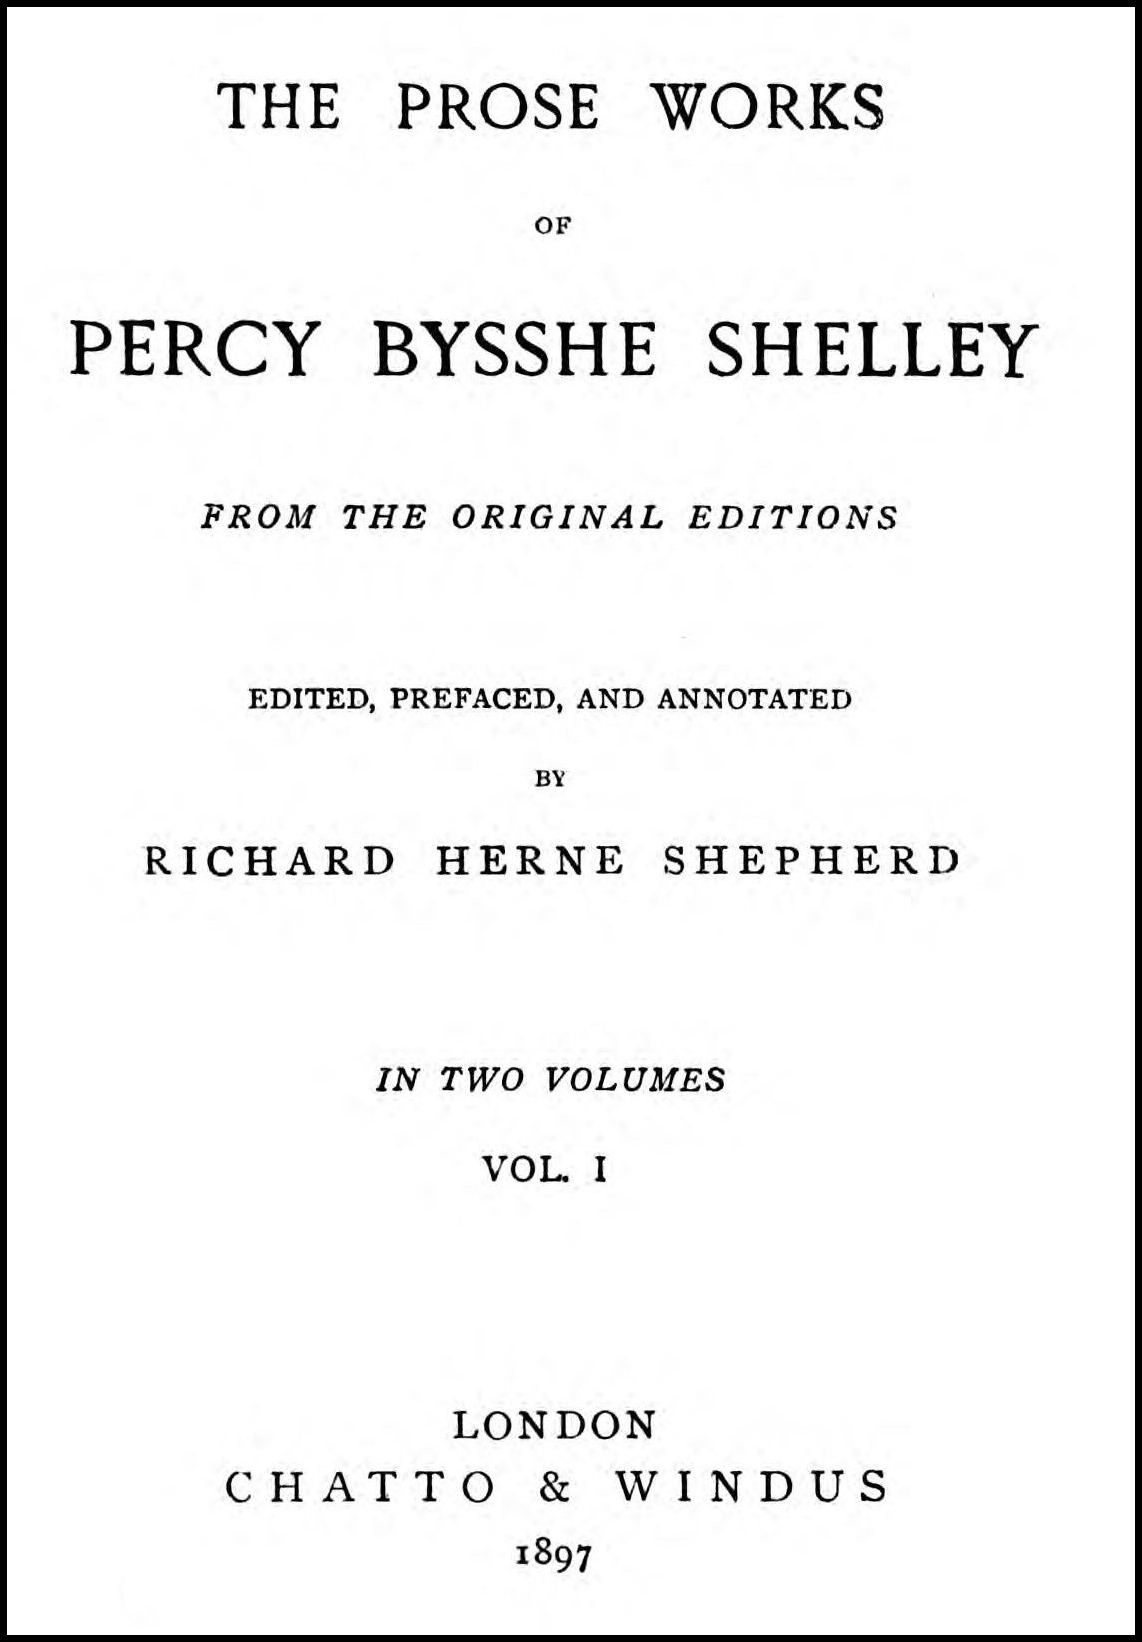 The Prose Works of Percy Bysshe Shelley [Vol. I of II], by Richard